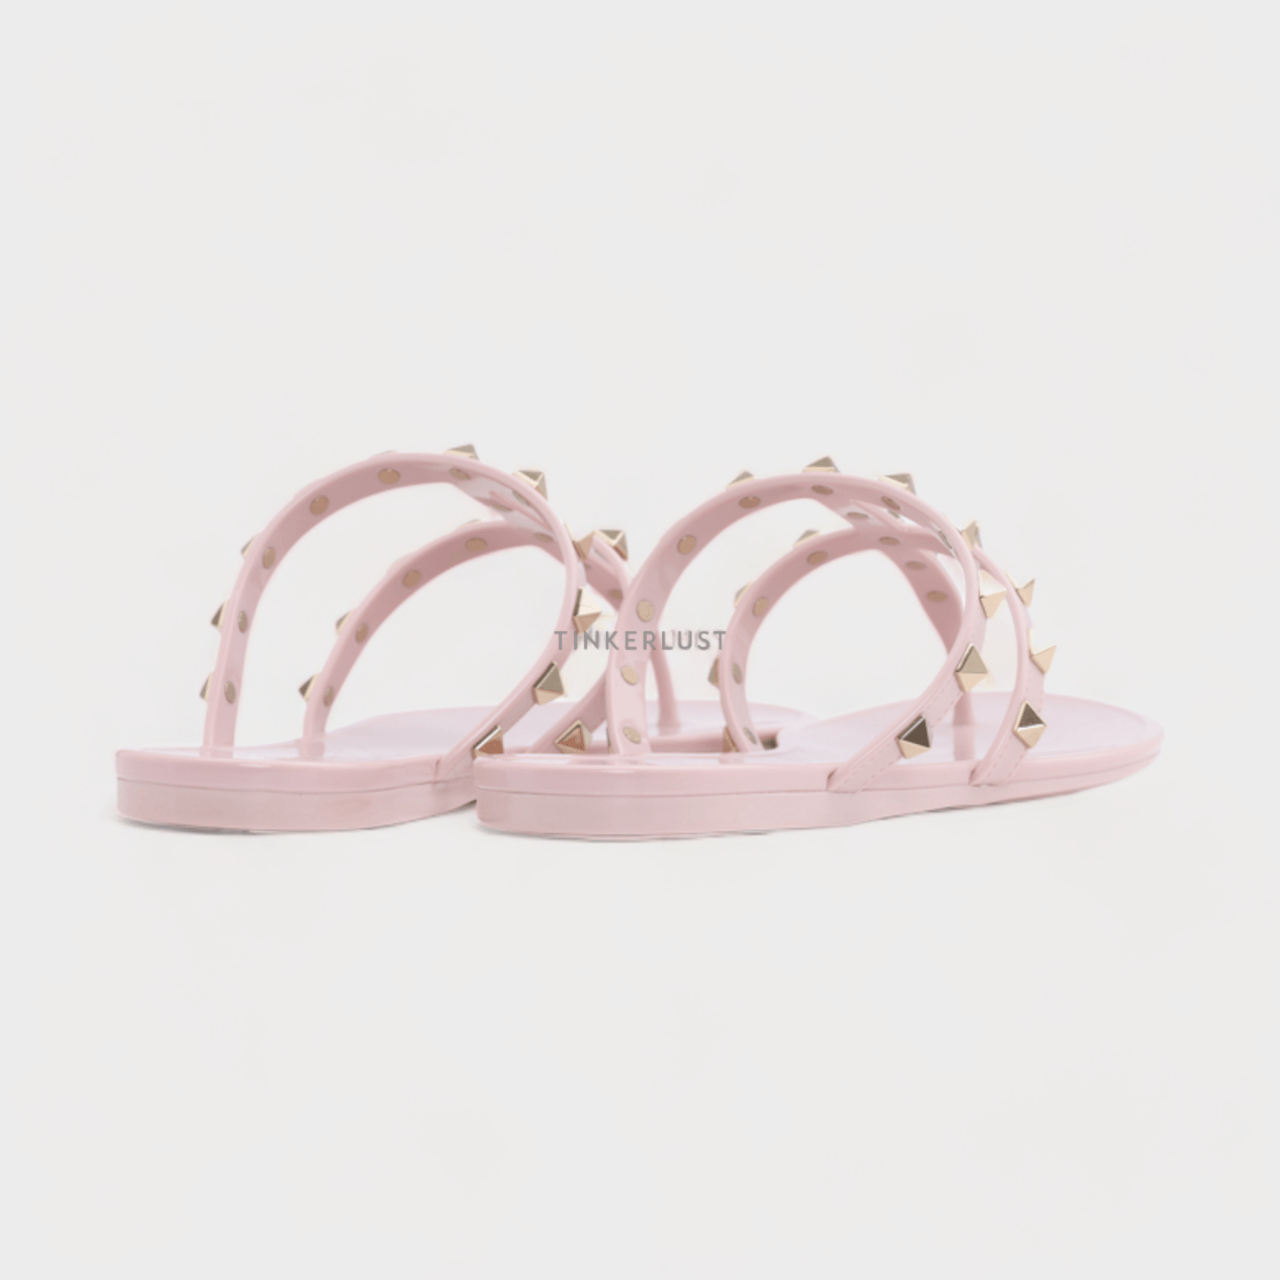 VALENTINO Rockstud Flat Rubber Sandals in Water Rose